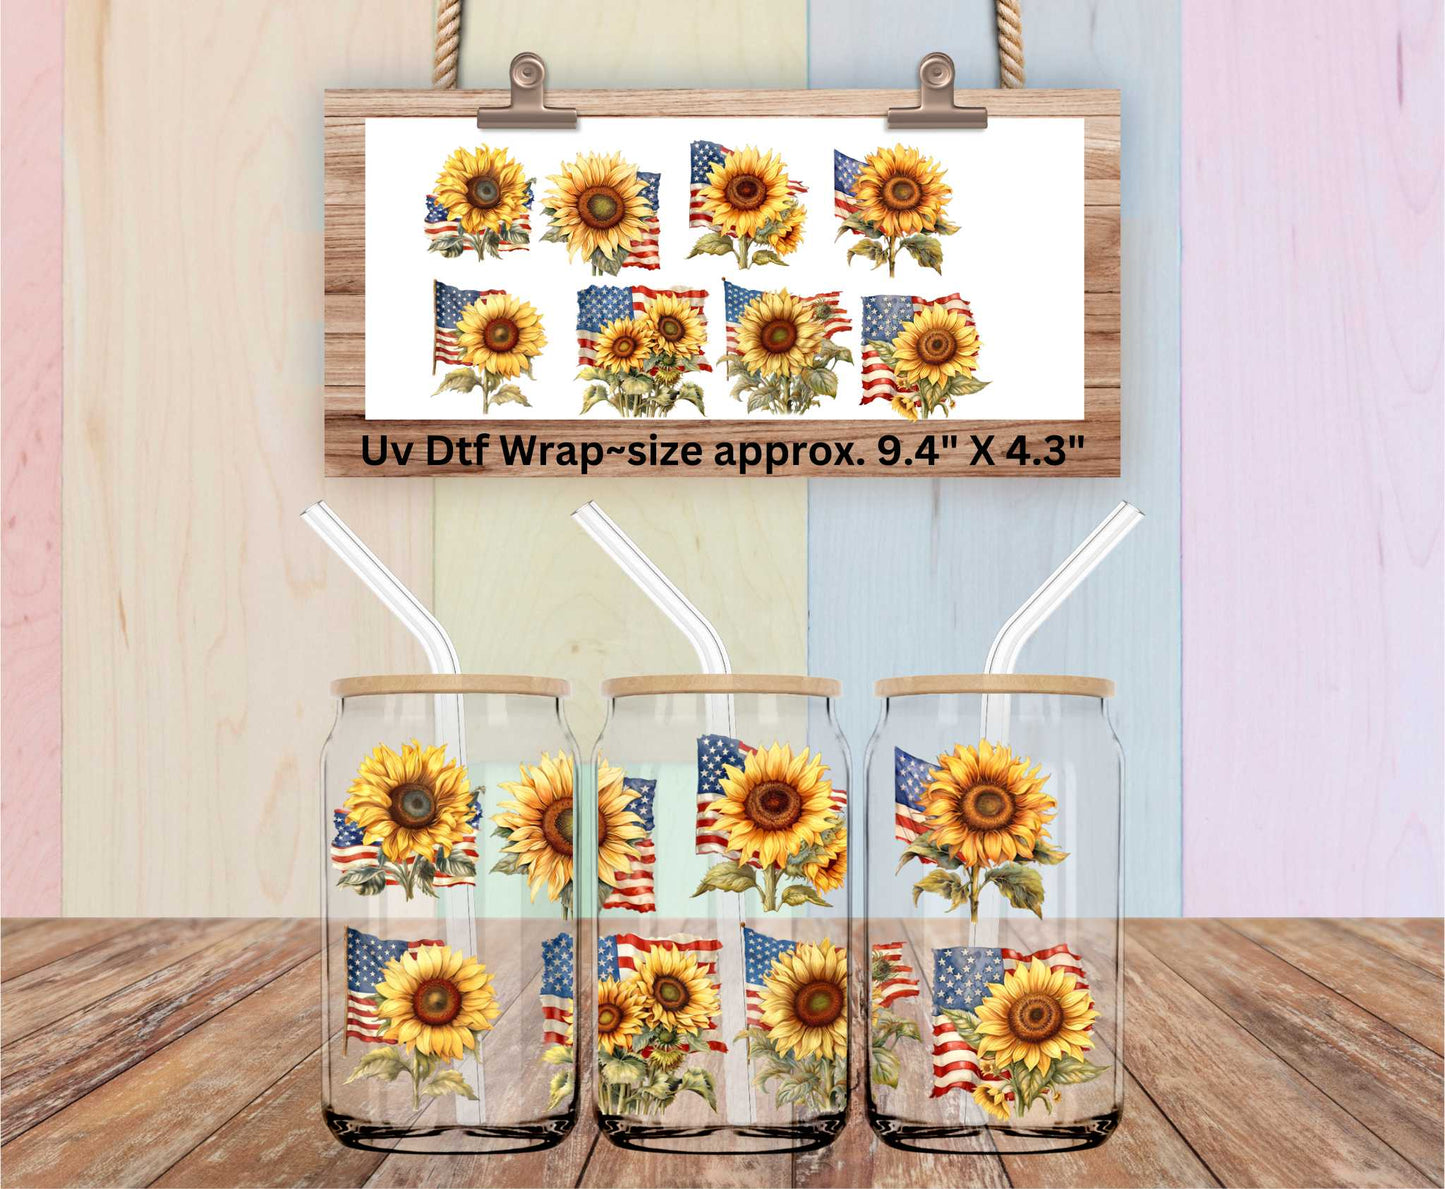 Uv Dtf Wrap Sunflowers & American Flags | Double Sided